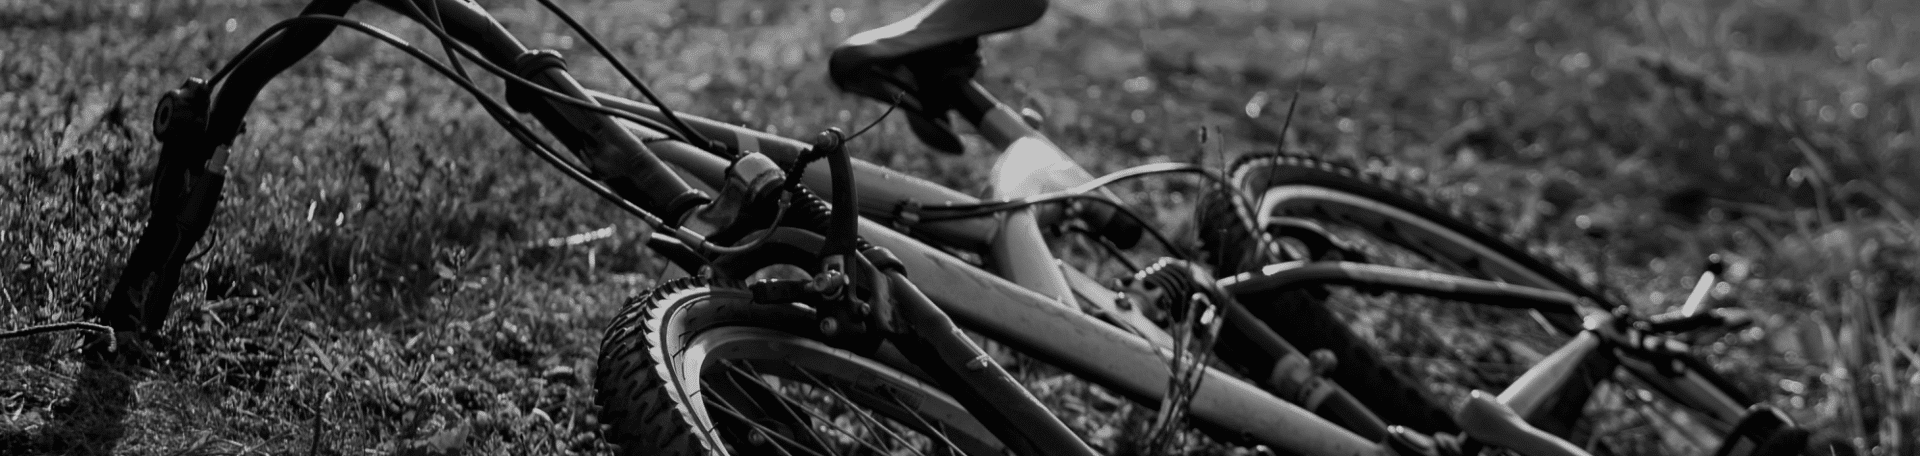 When to Hire a Fatal Bicycle Accident Attorney